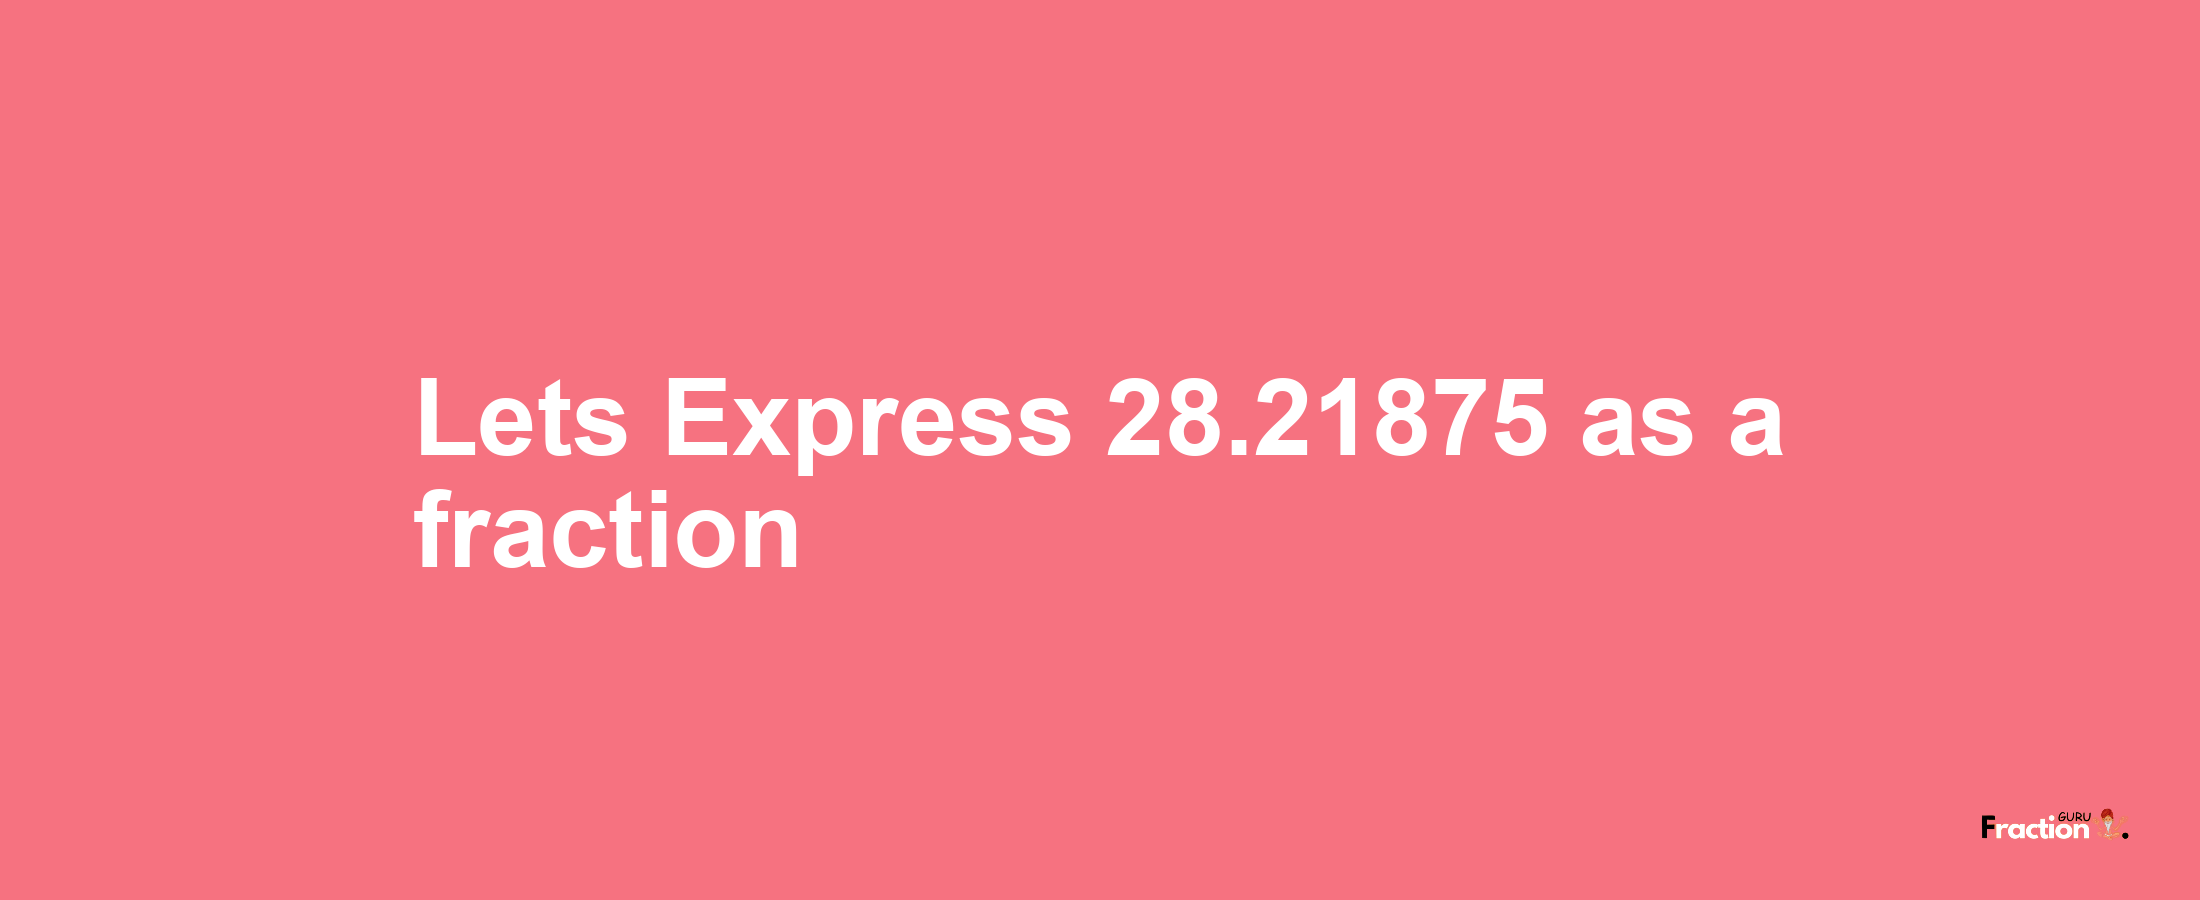 Lets Express 28.21875 as afraction